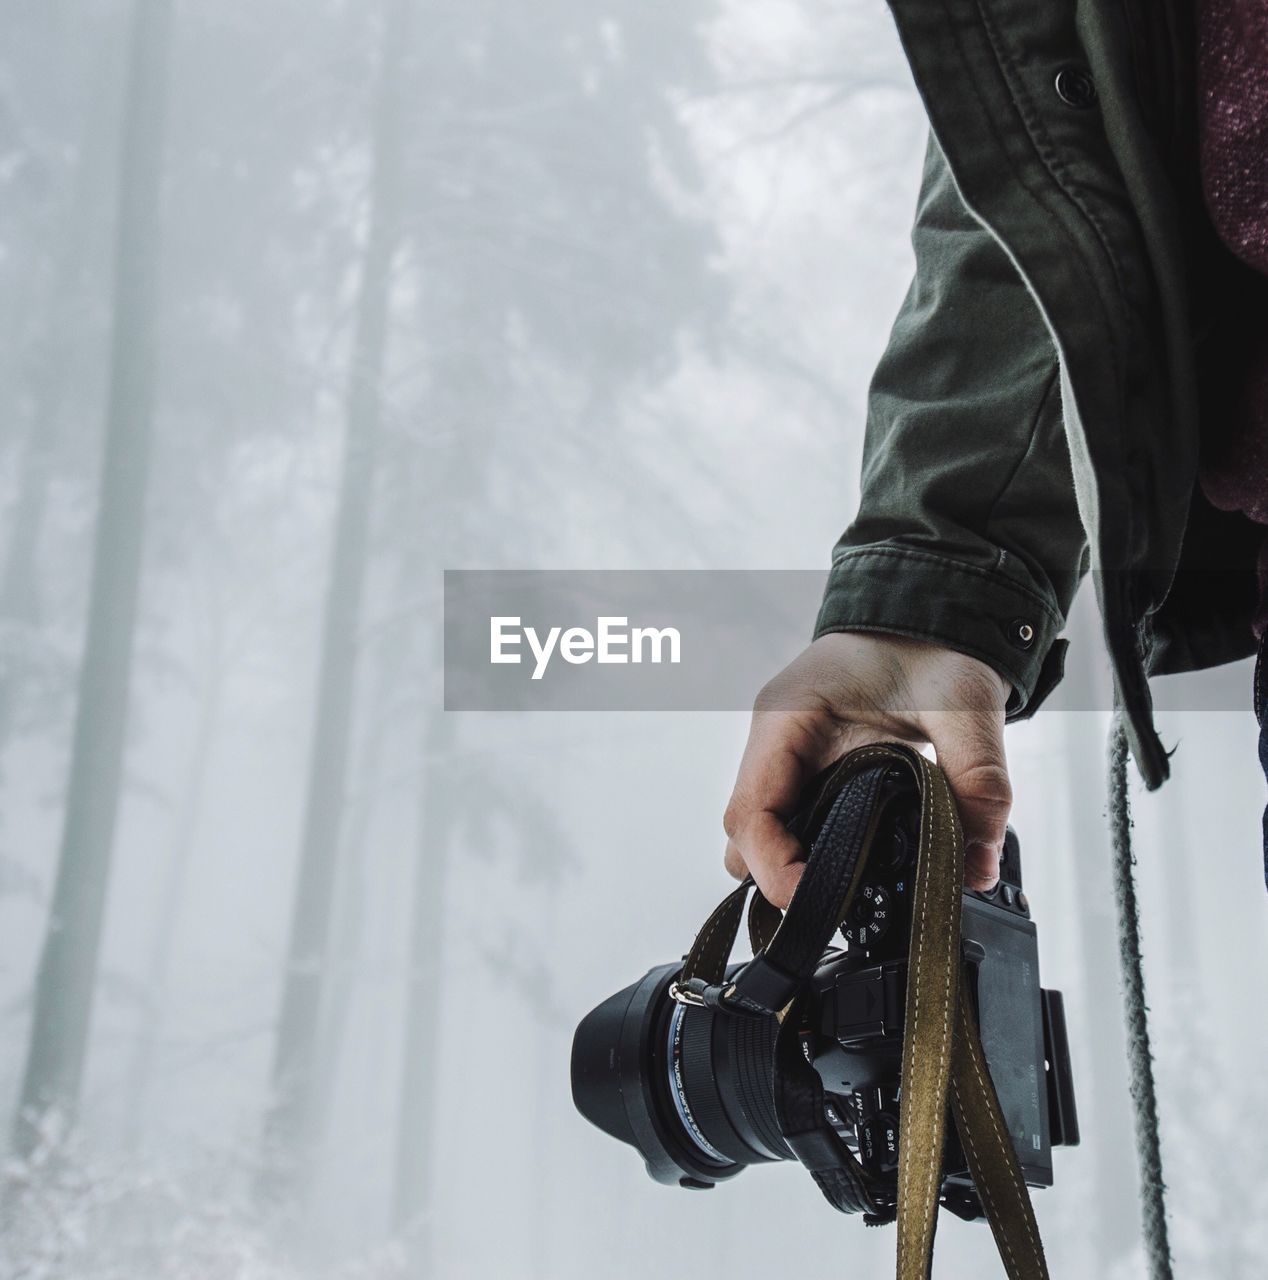 Cropped image of man holding camera at forest during foggy weather